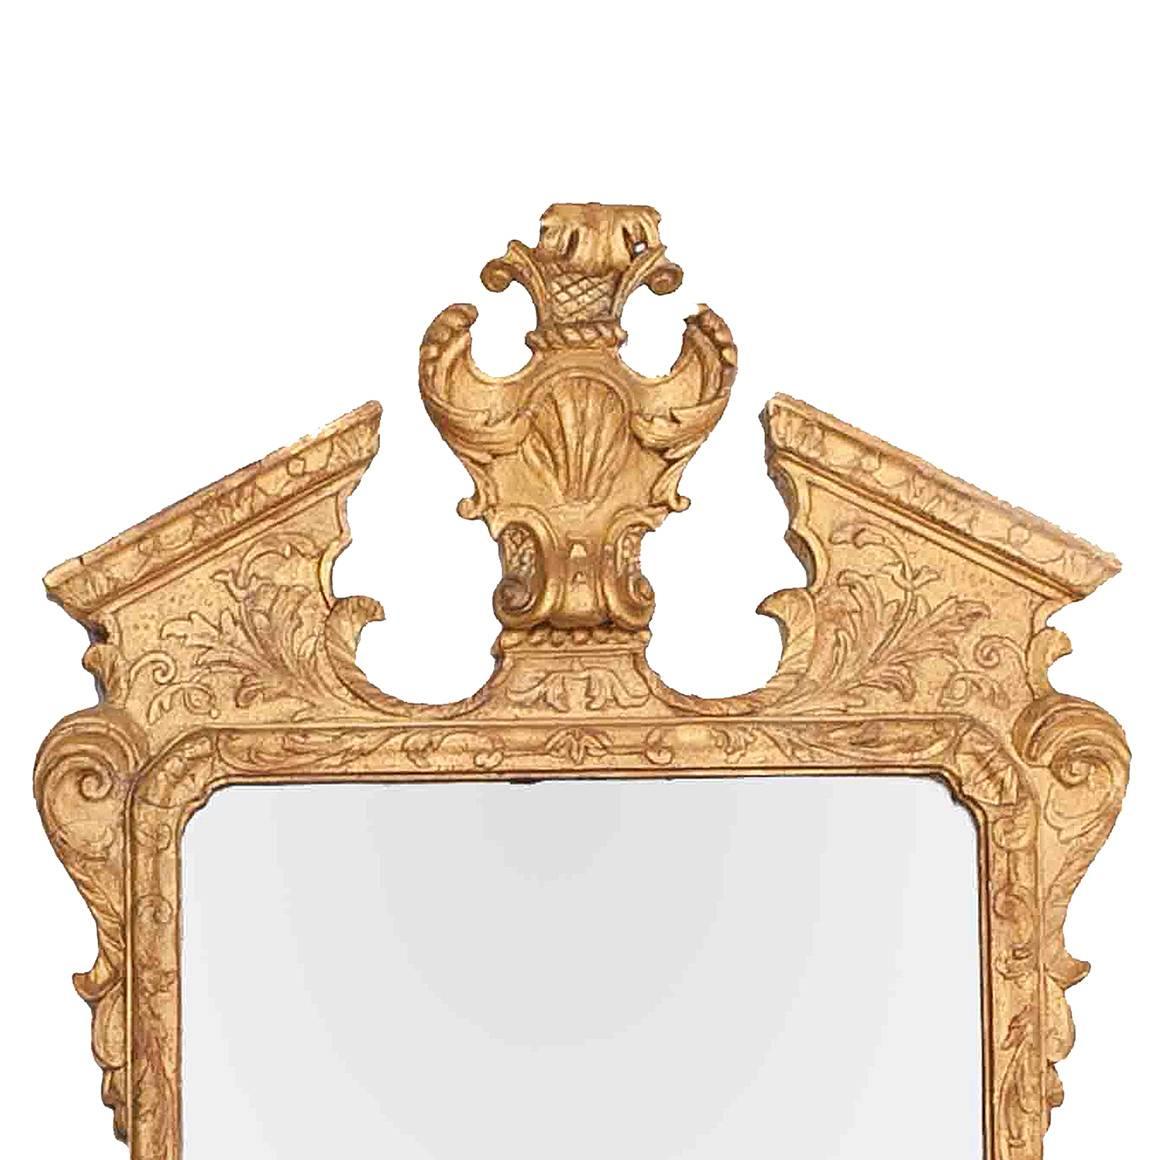 This early 18th century Irish George I wall mirror is topped by a broken pediment with a shell and acanthus leaf cartouche. The shaped apron is adorned with a scallop shell, and frame itself is ornamented with an acanthus leaf and strapwork motif.